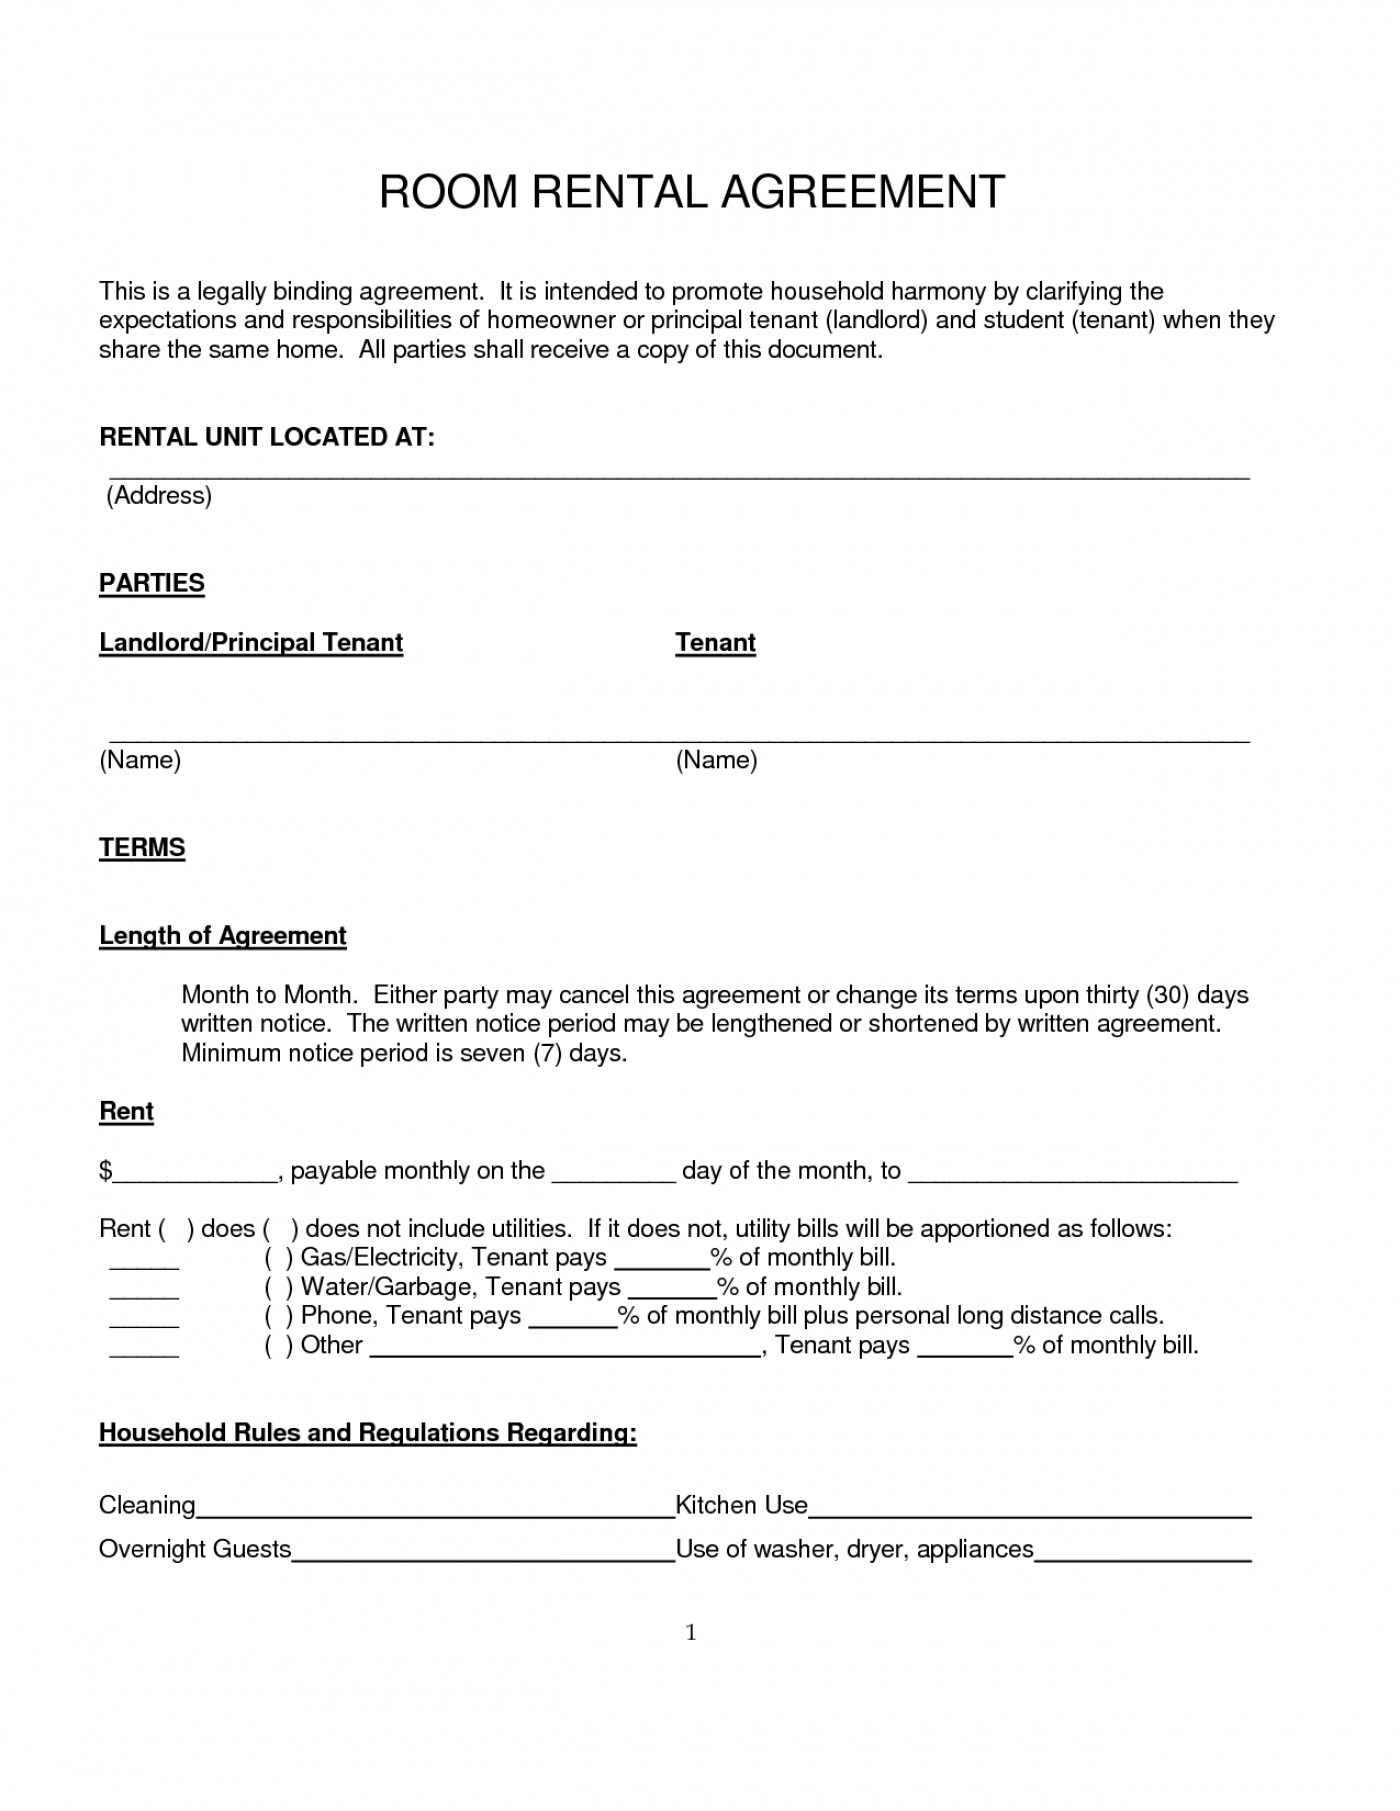 Simple Room Lease Agreement 018 Room Rental Agreement Texas Fresh Form Templates Lease Forms